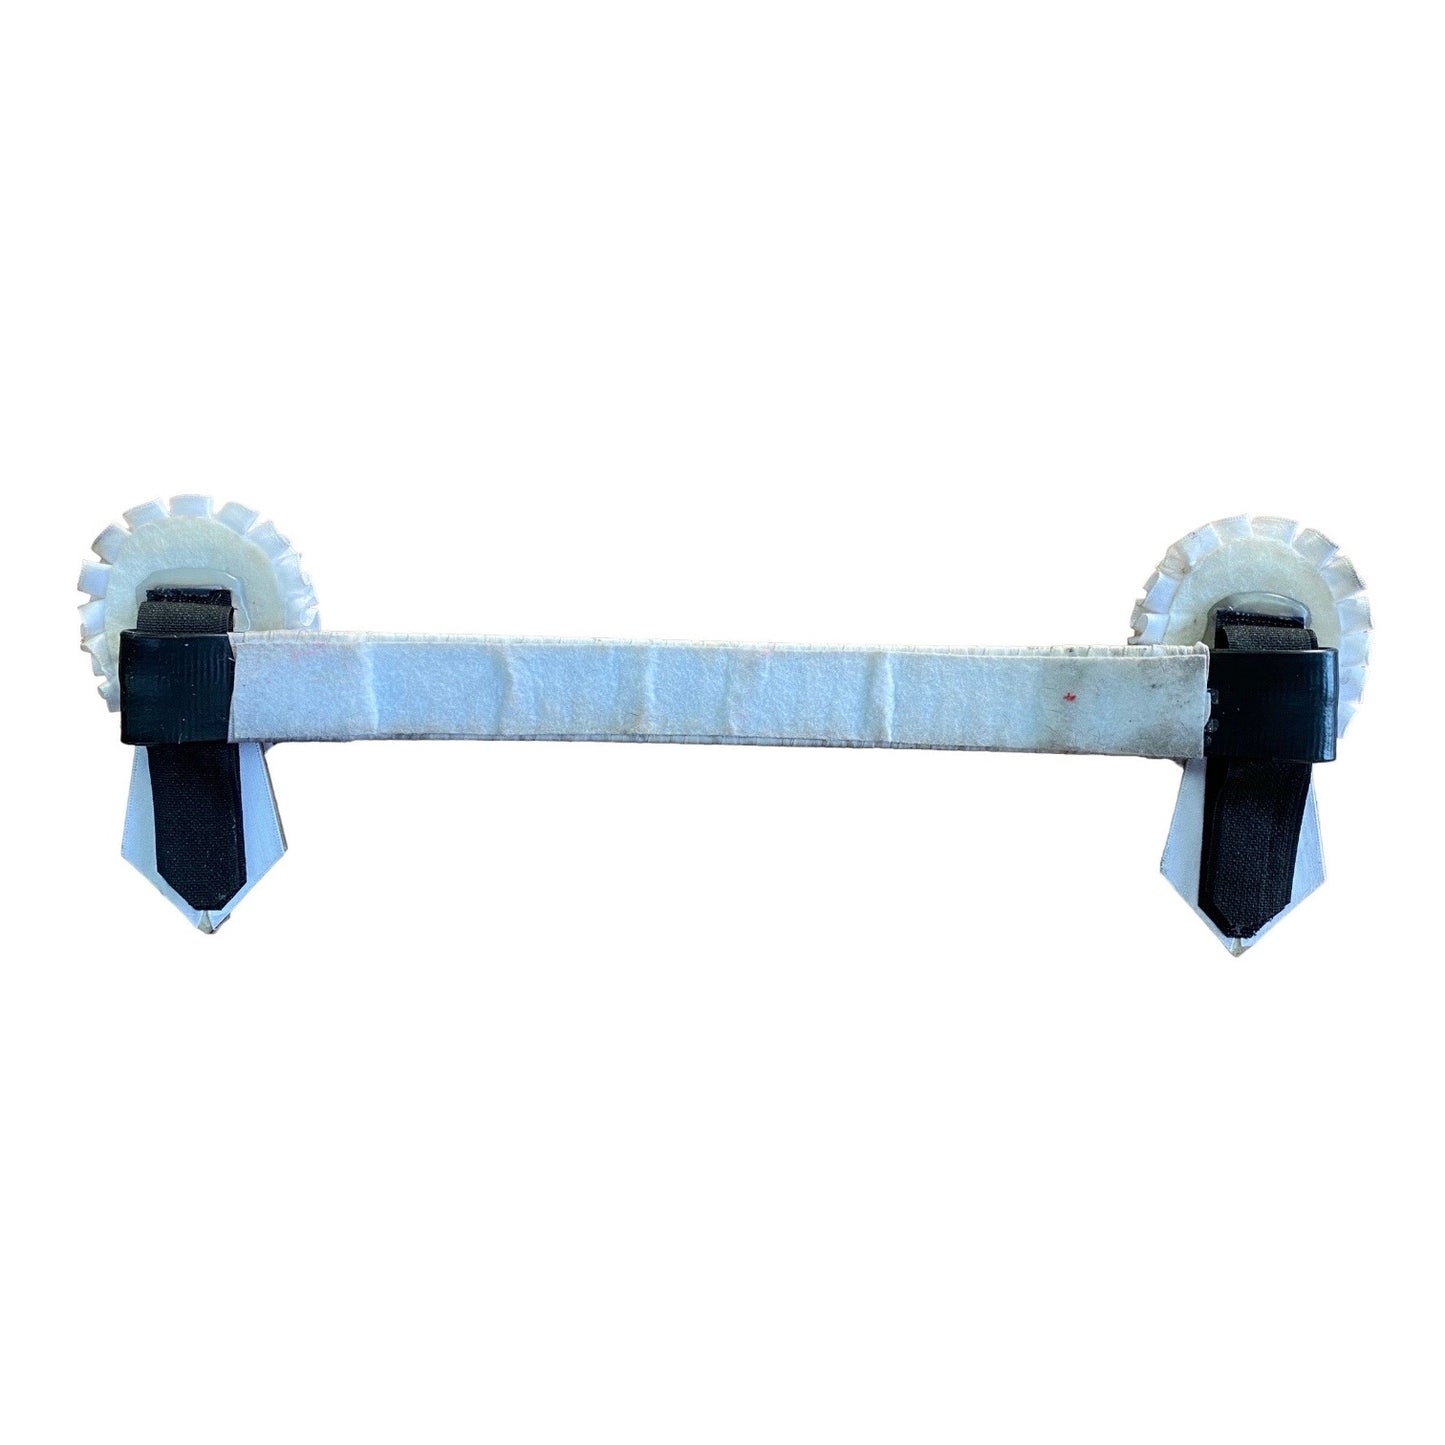 Browband 14" White/Gold (2312212)